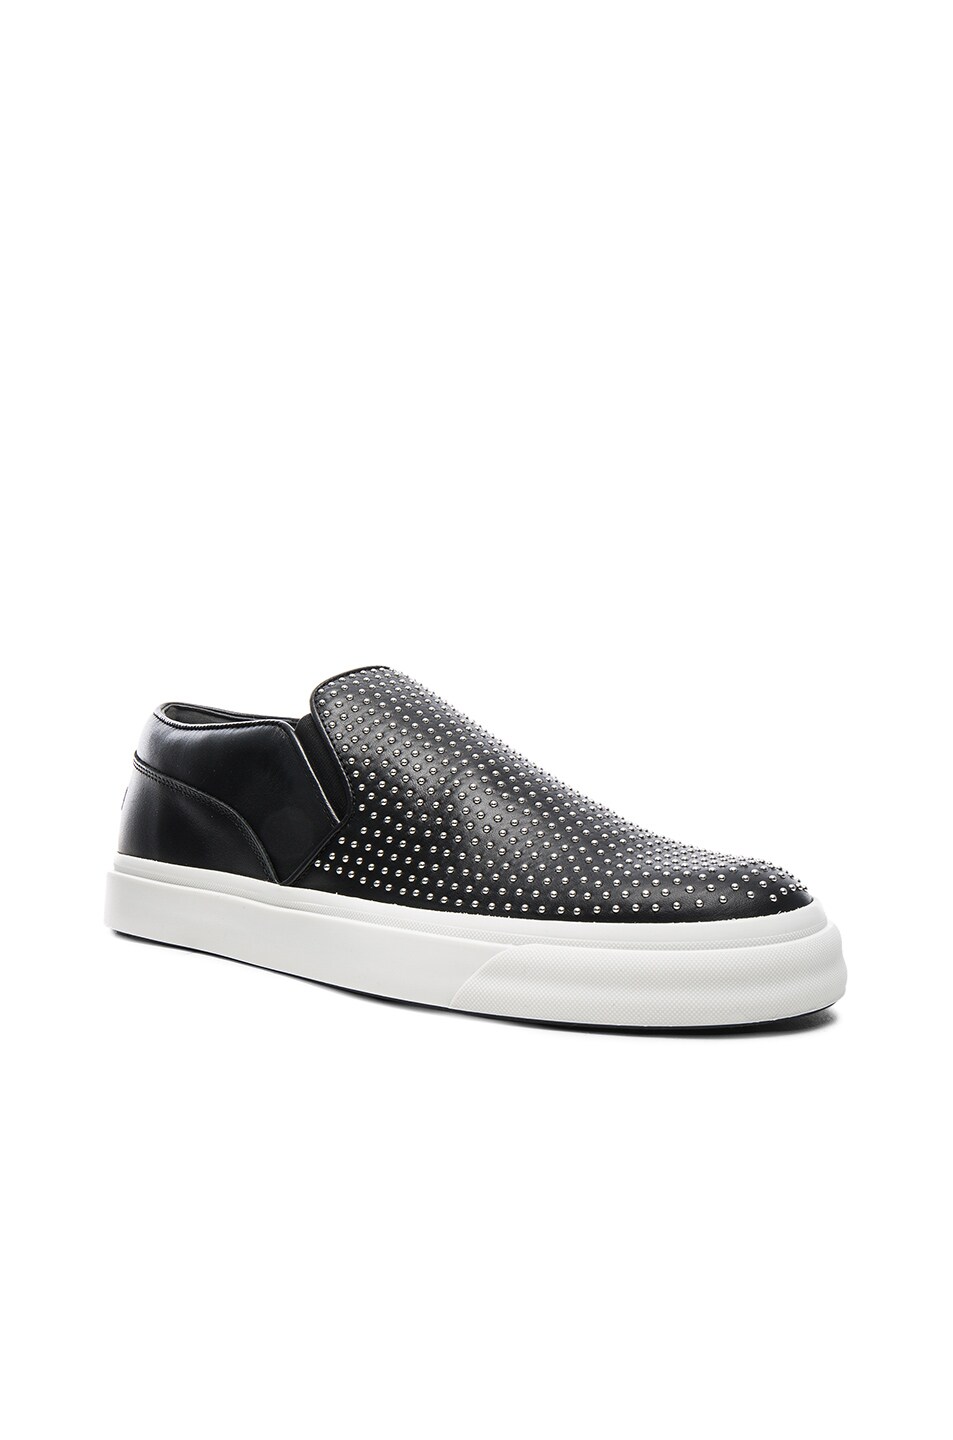 Image 1 of Alexander McQueen Studded Leather Slip Ons in Black